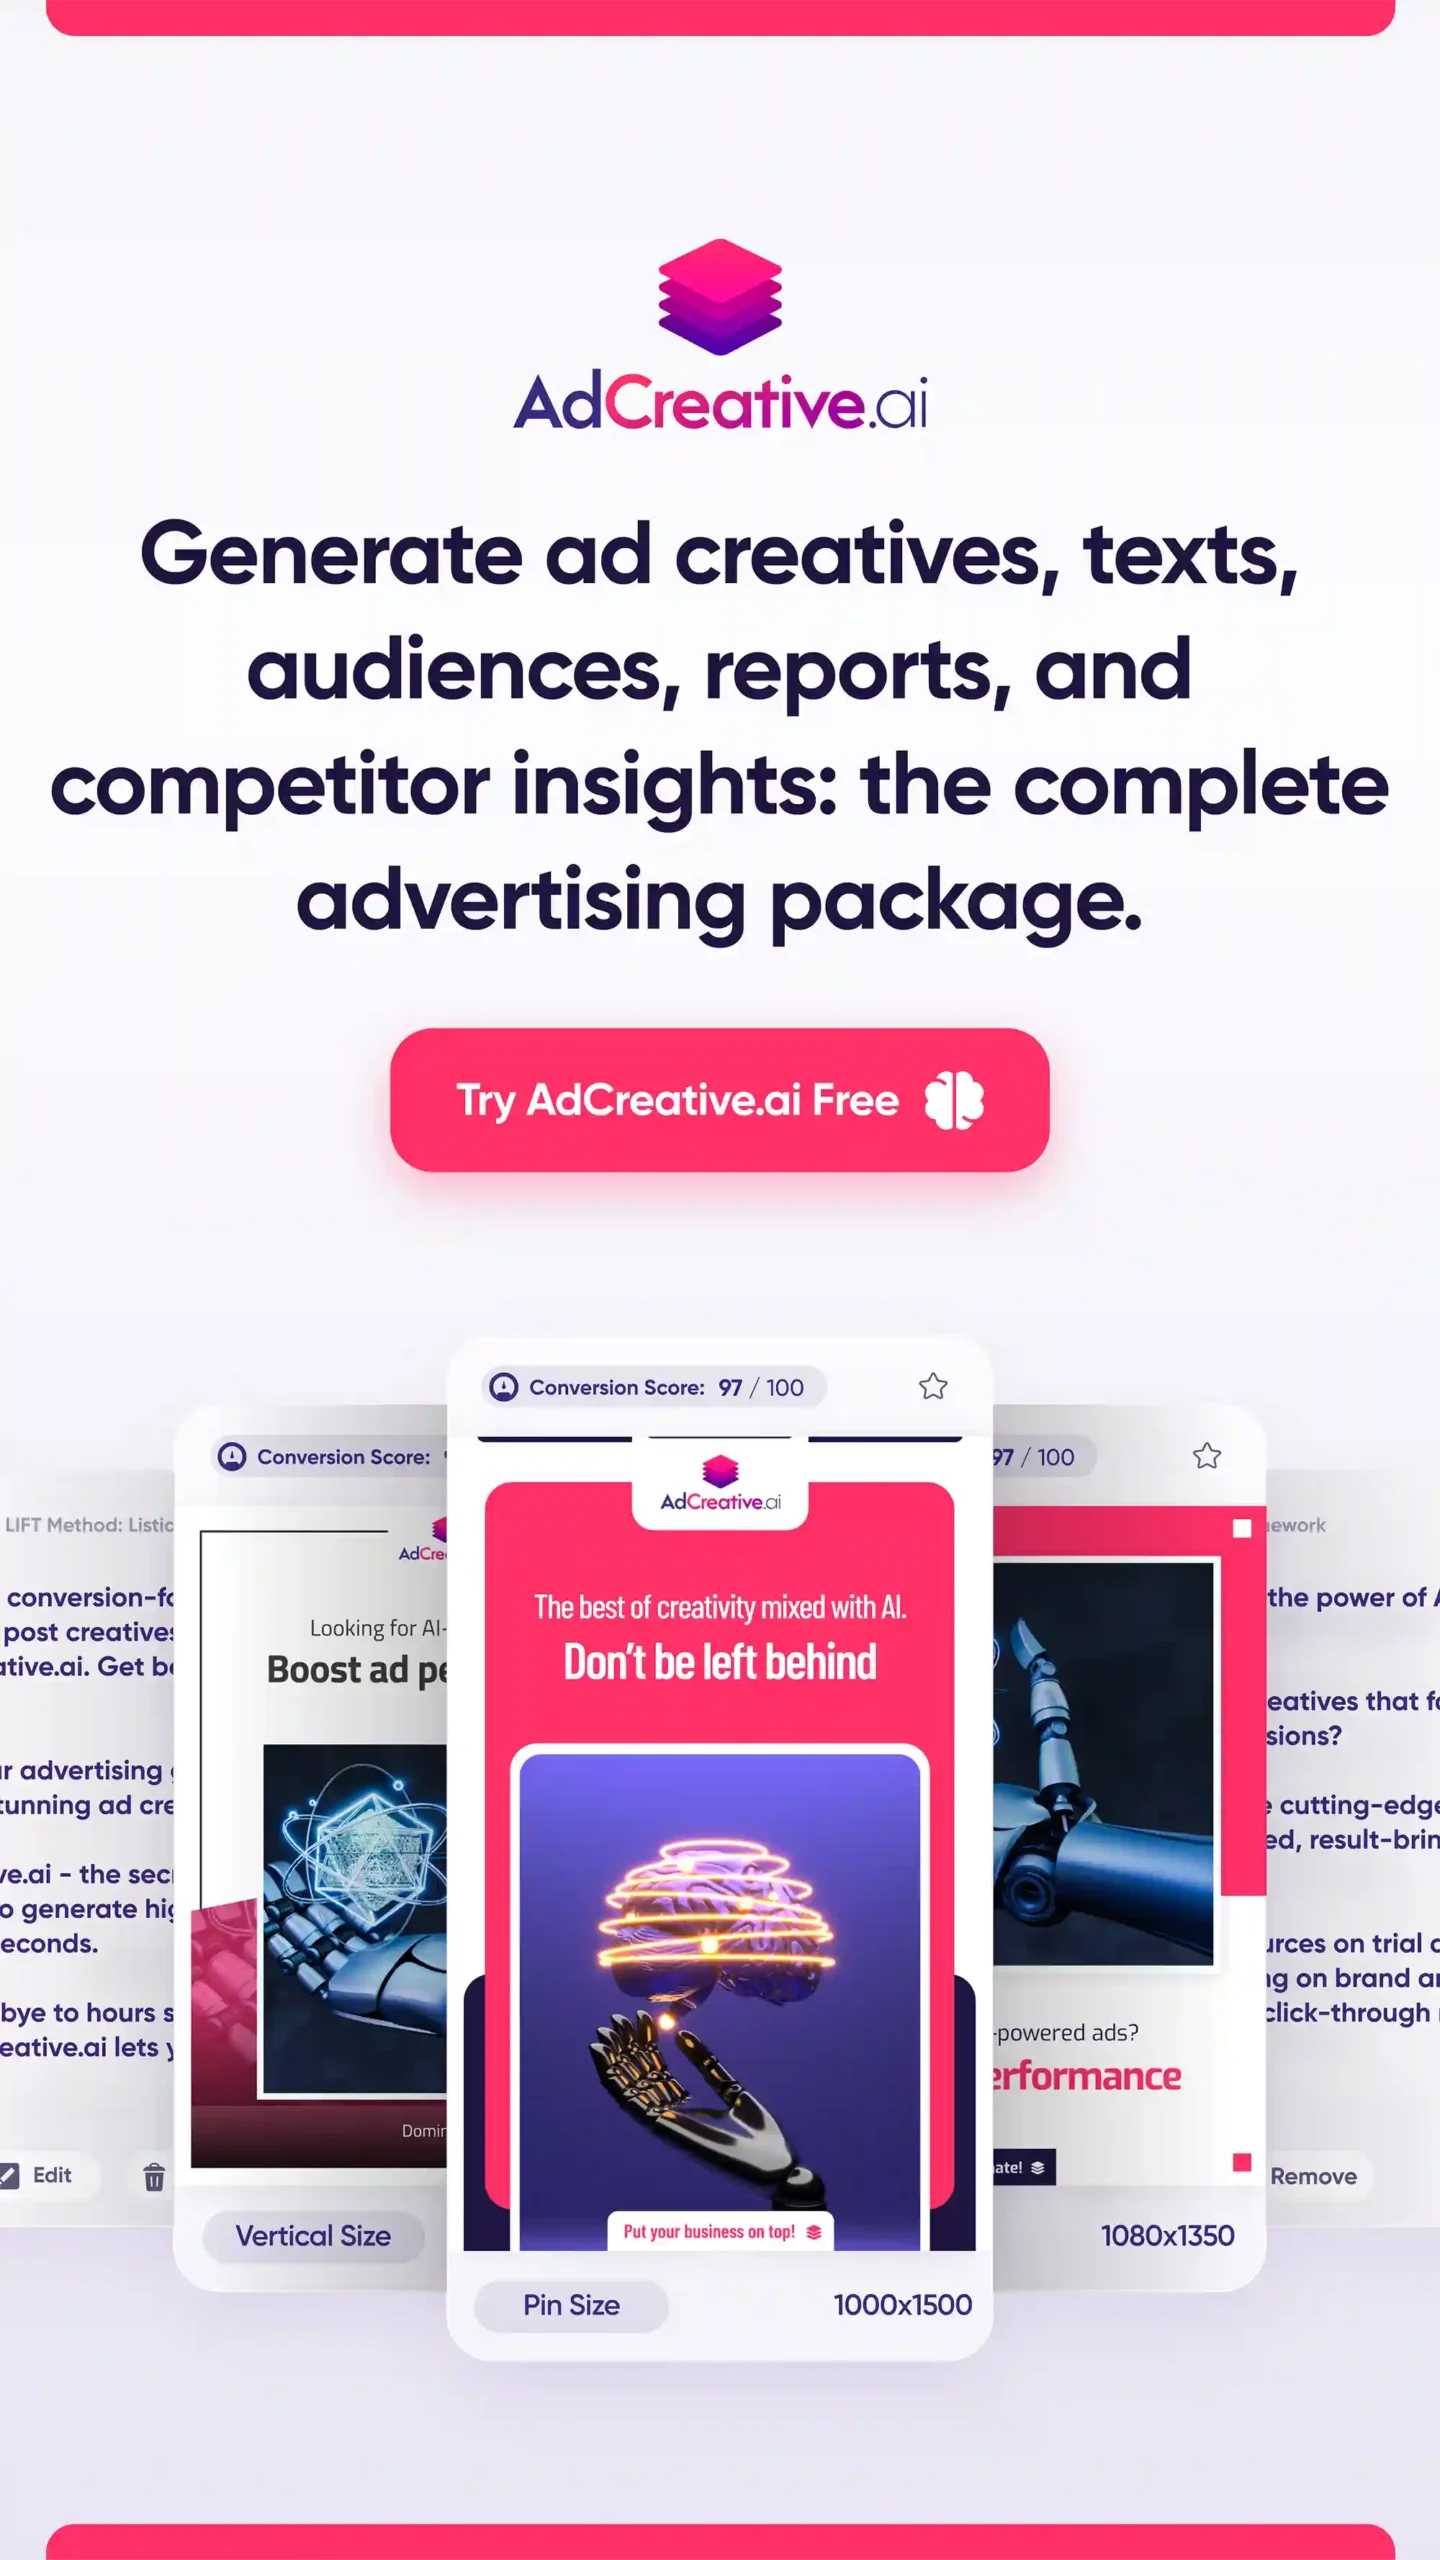 Discover more about the What Is Adcreative.AI?.